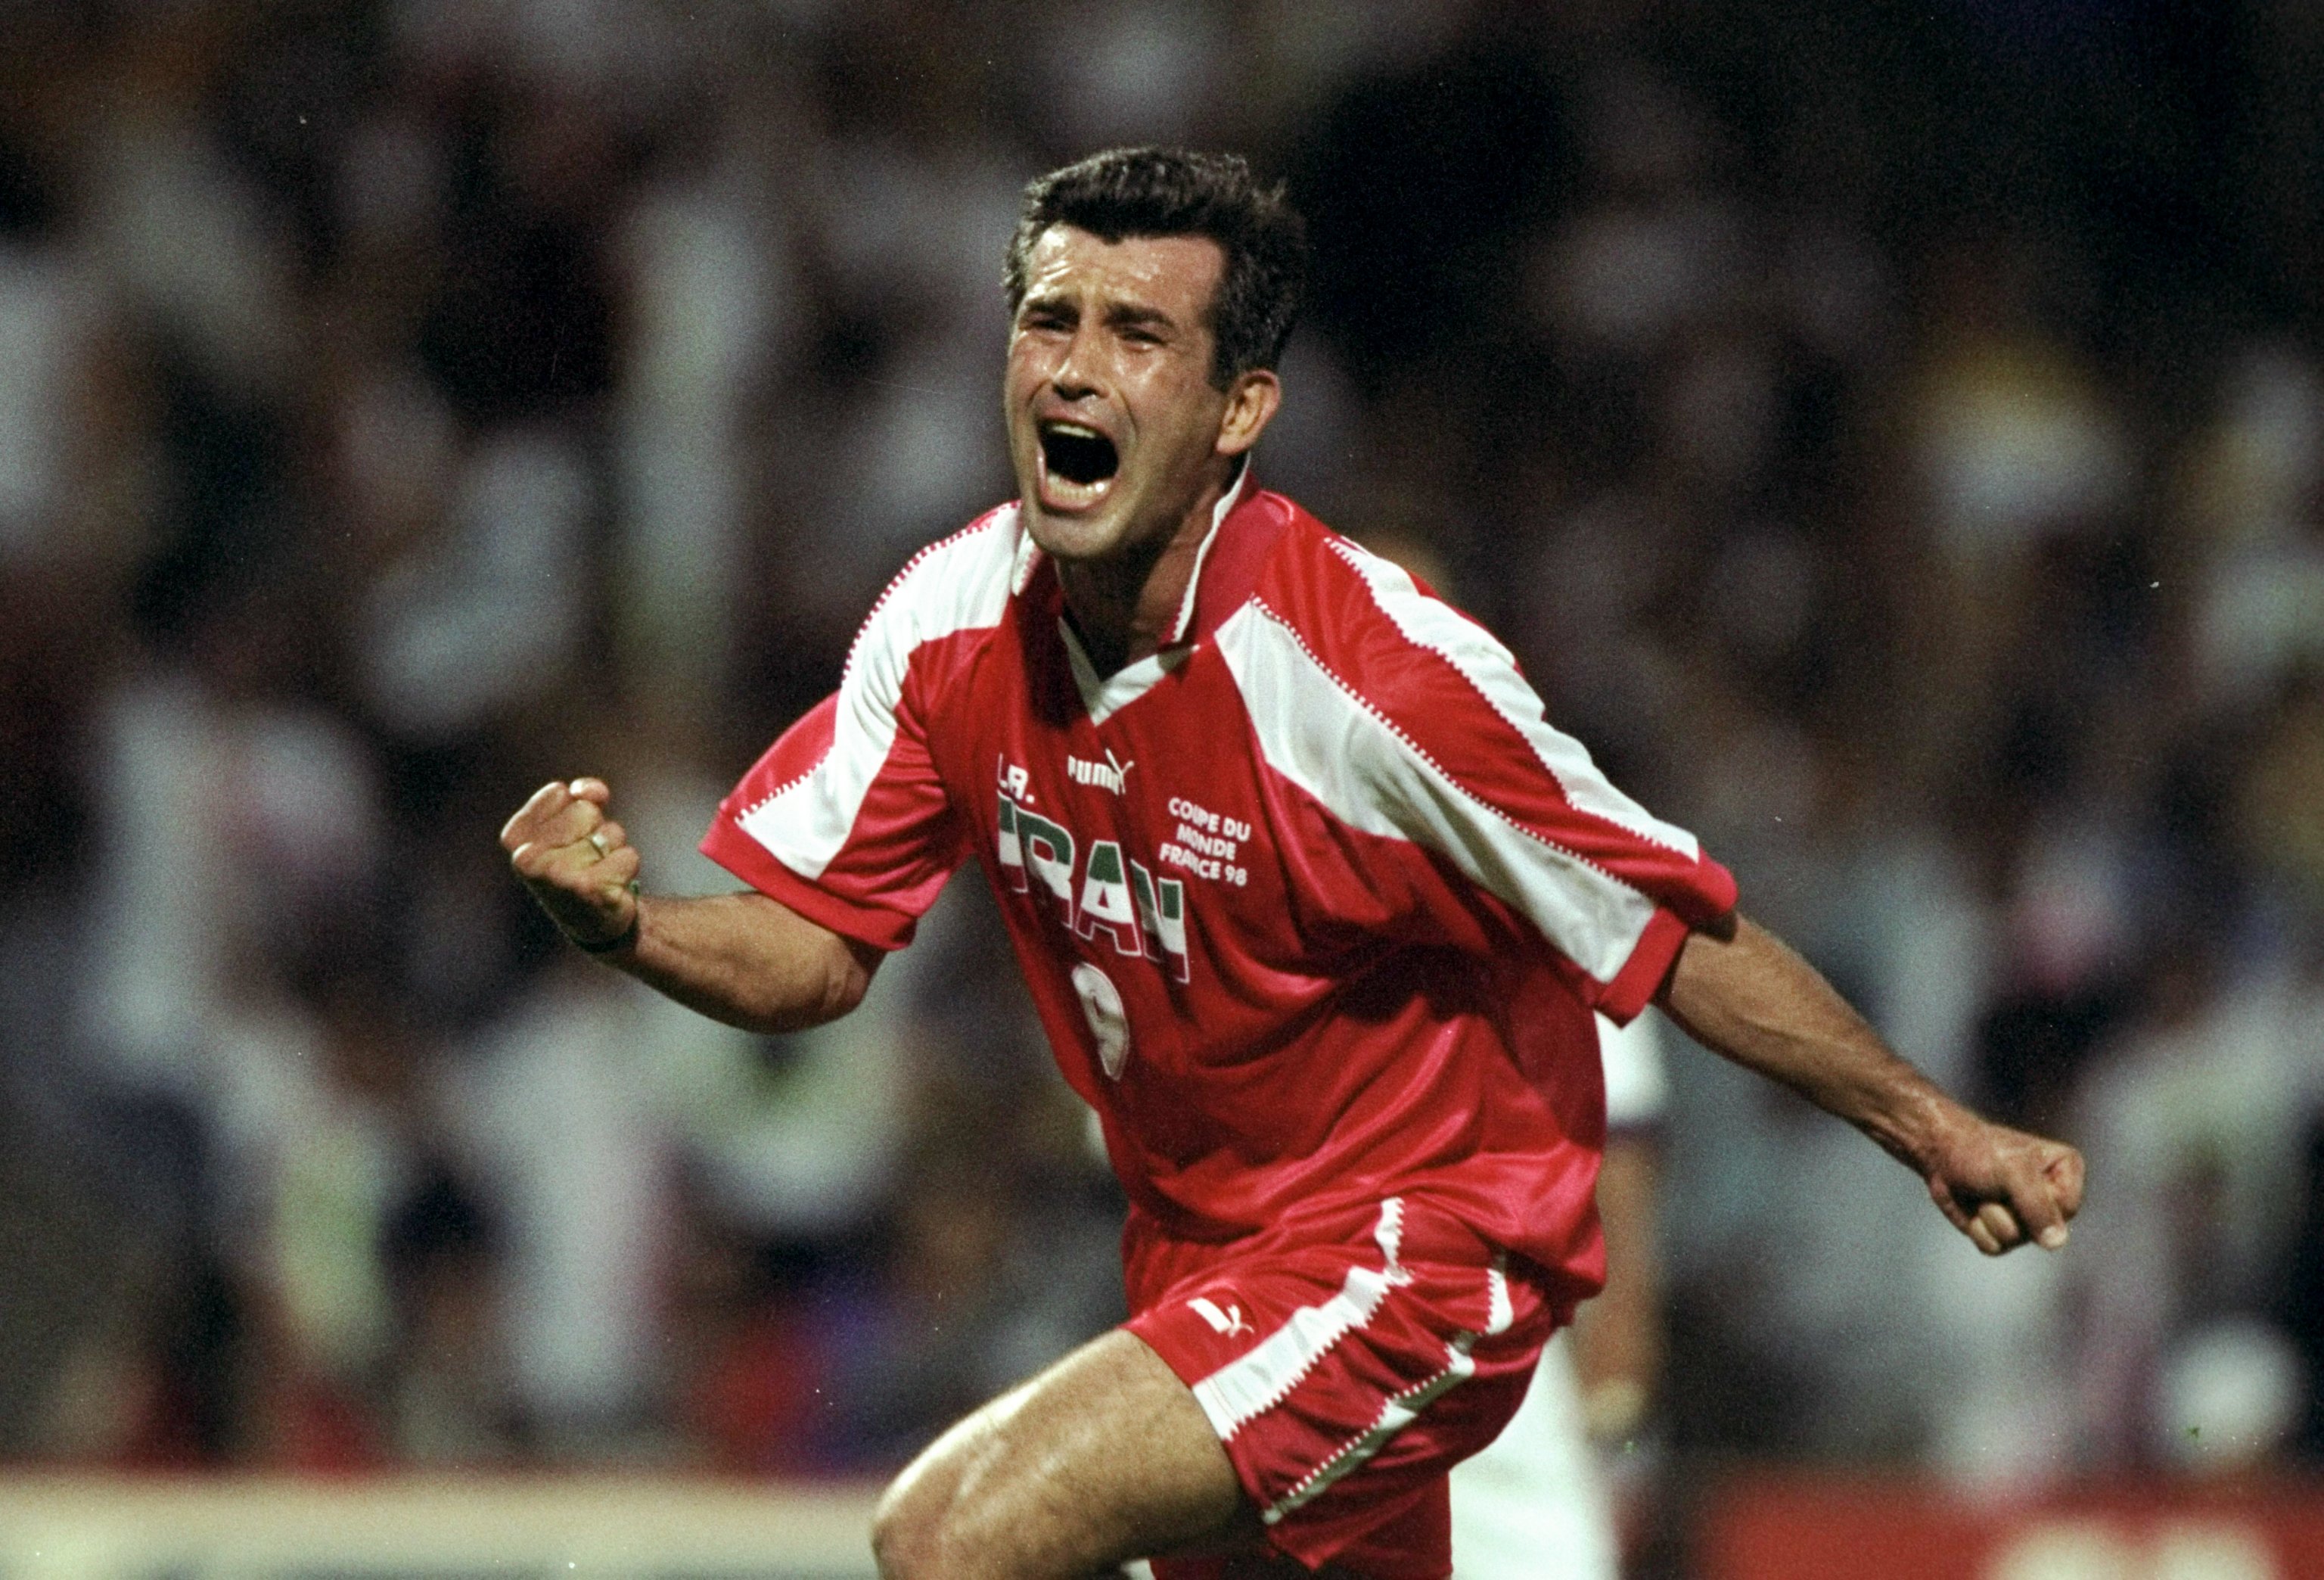 Hamid Estili of Iran in action during the World Cup first round match against the USA at the Stade Gerland in Lyon, France in 1998. Iran won the match 2-1. (Ben Radford/Allsport—Getty Images)